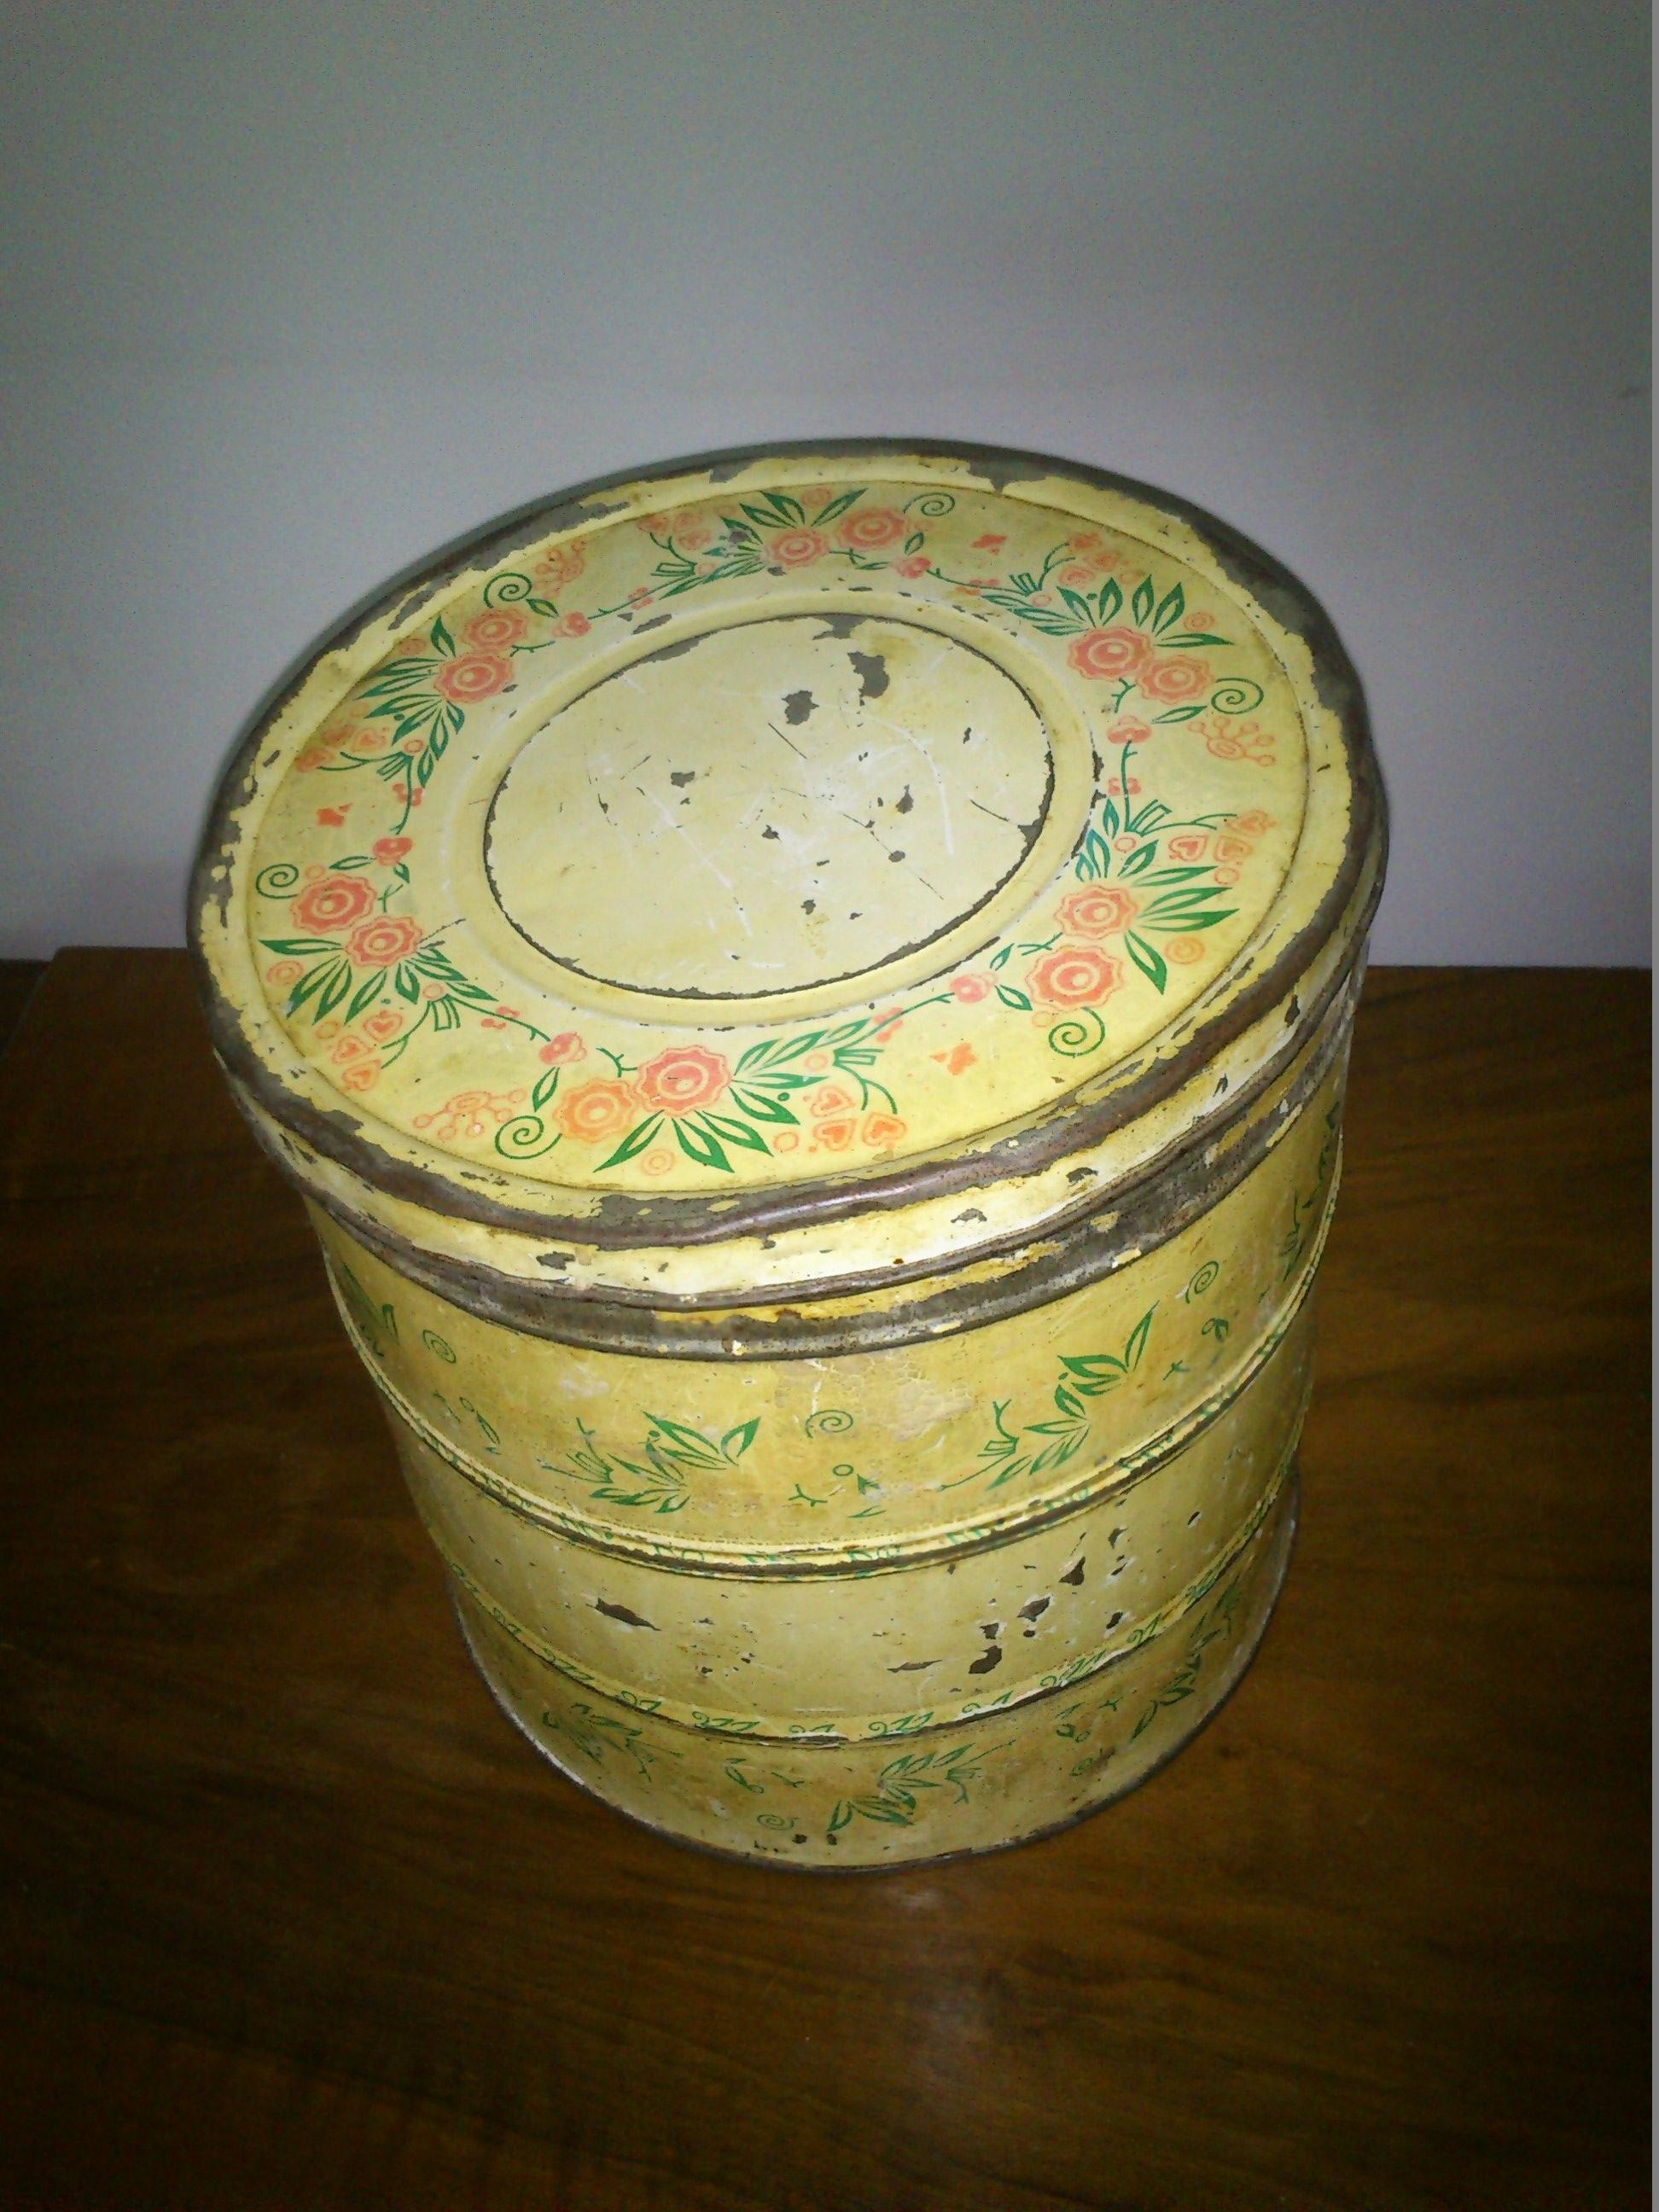 Vintage flour bin

Ships from Hungary
Measures: Height 7.87 in
Diameter 7.48 in.